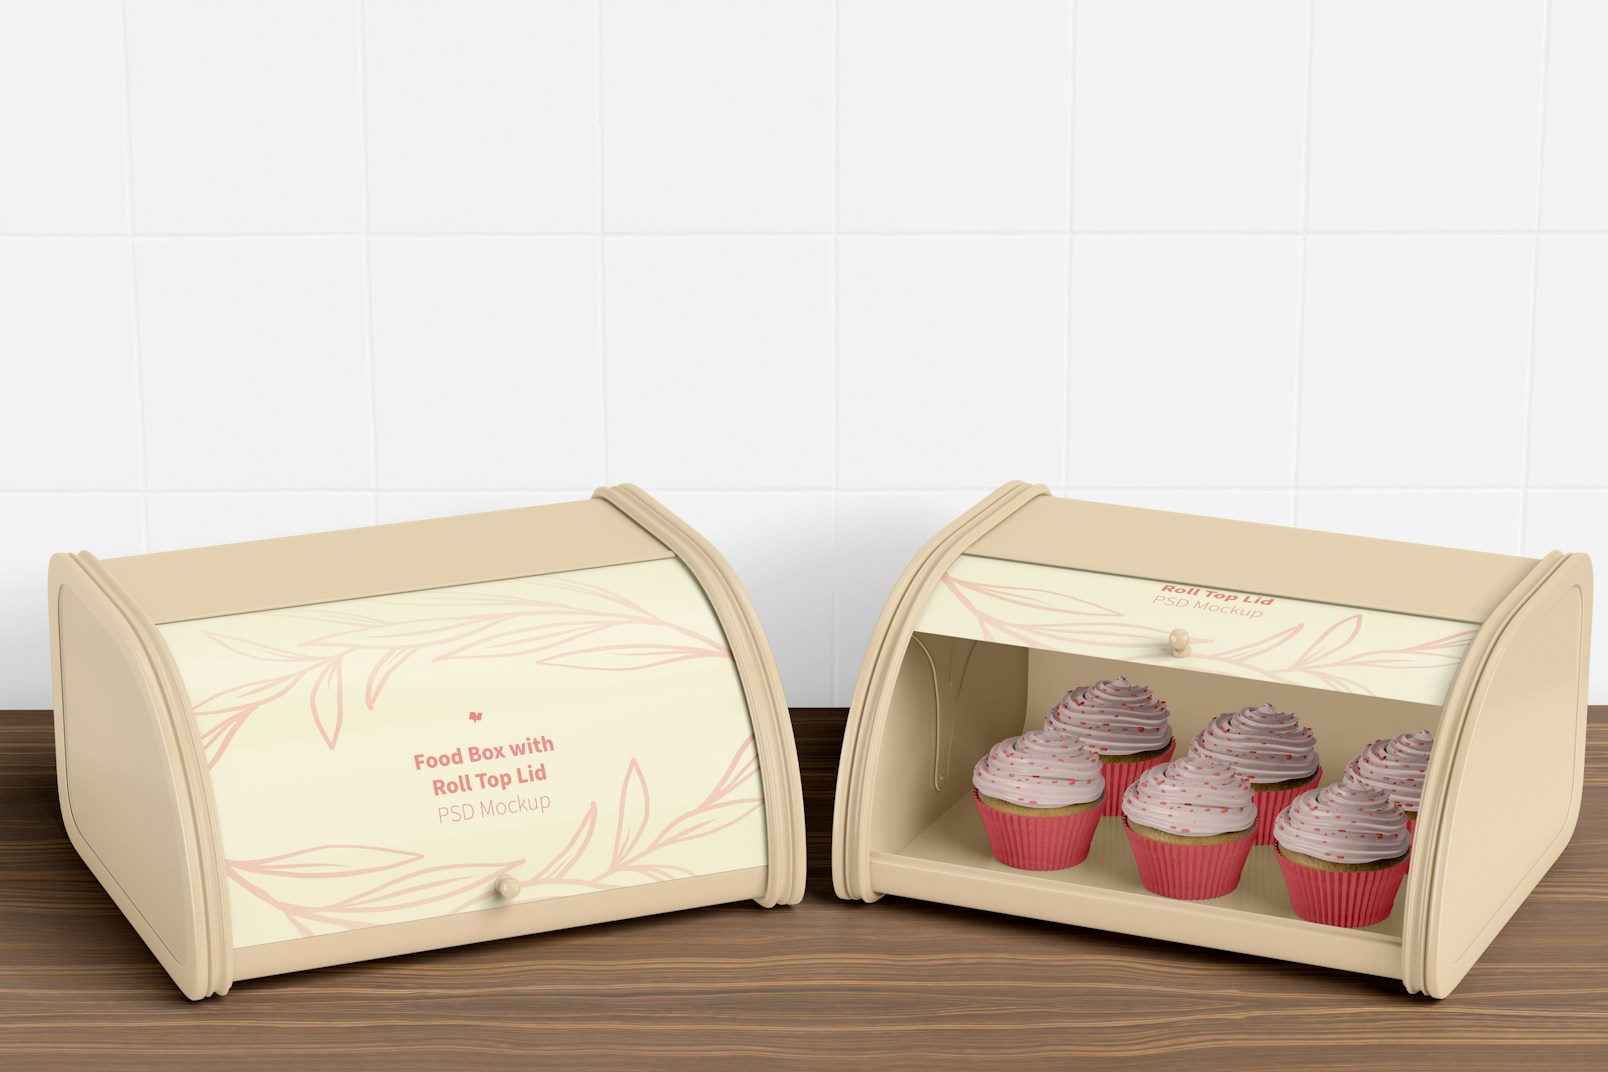 Food Boxes with Roll Top Lid Mockup